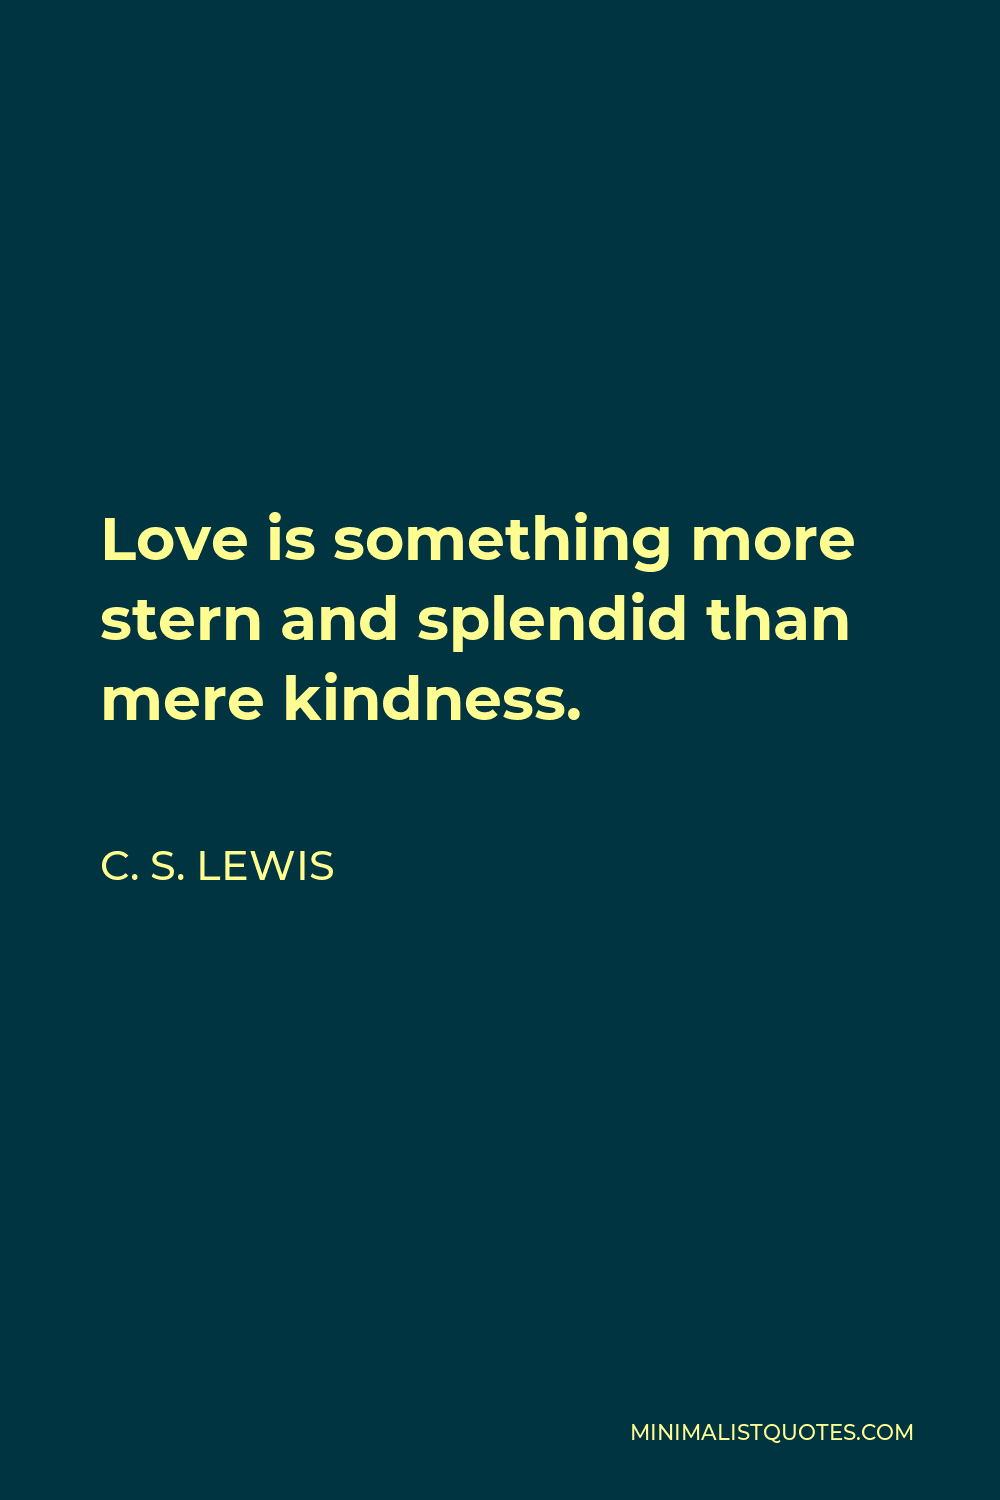 C. S. Lewis Quote - Love is something more stern and splendid than mere kindness.